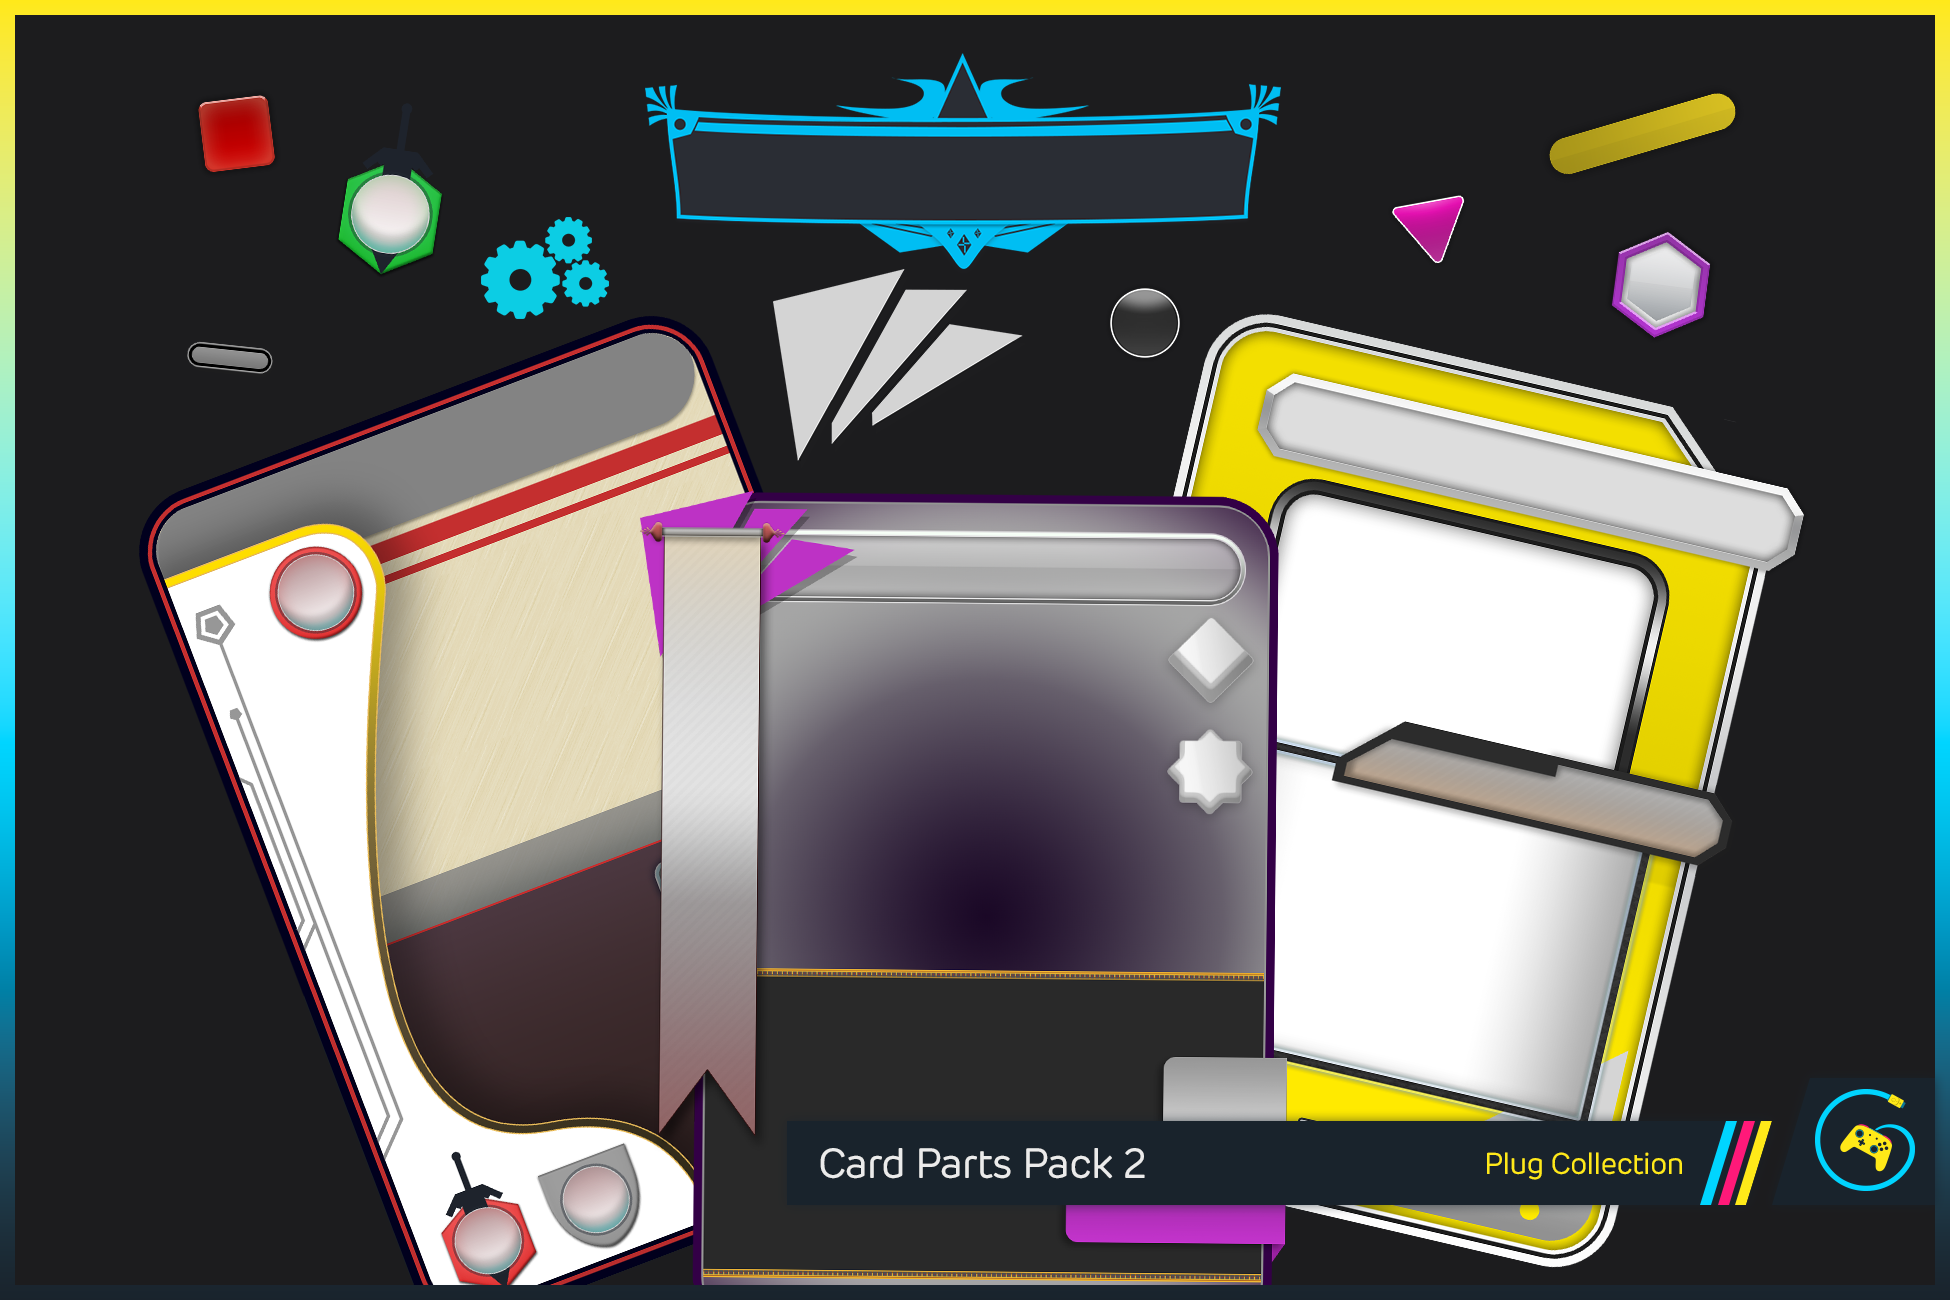 Card Parts Pack 2